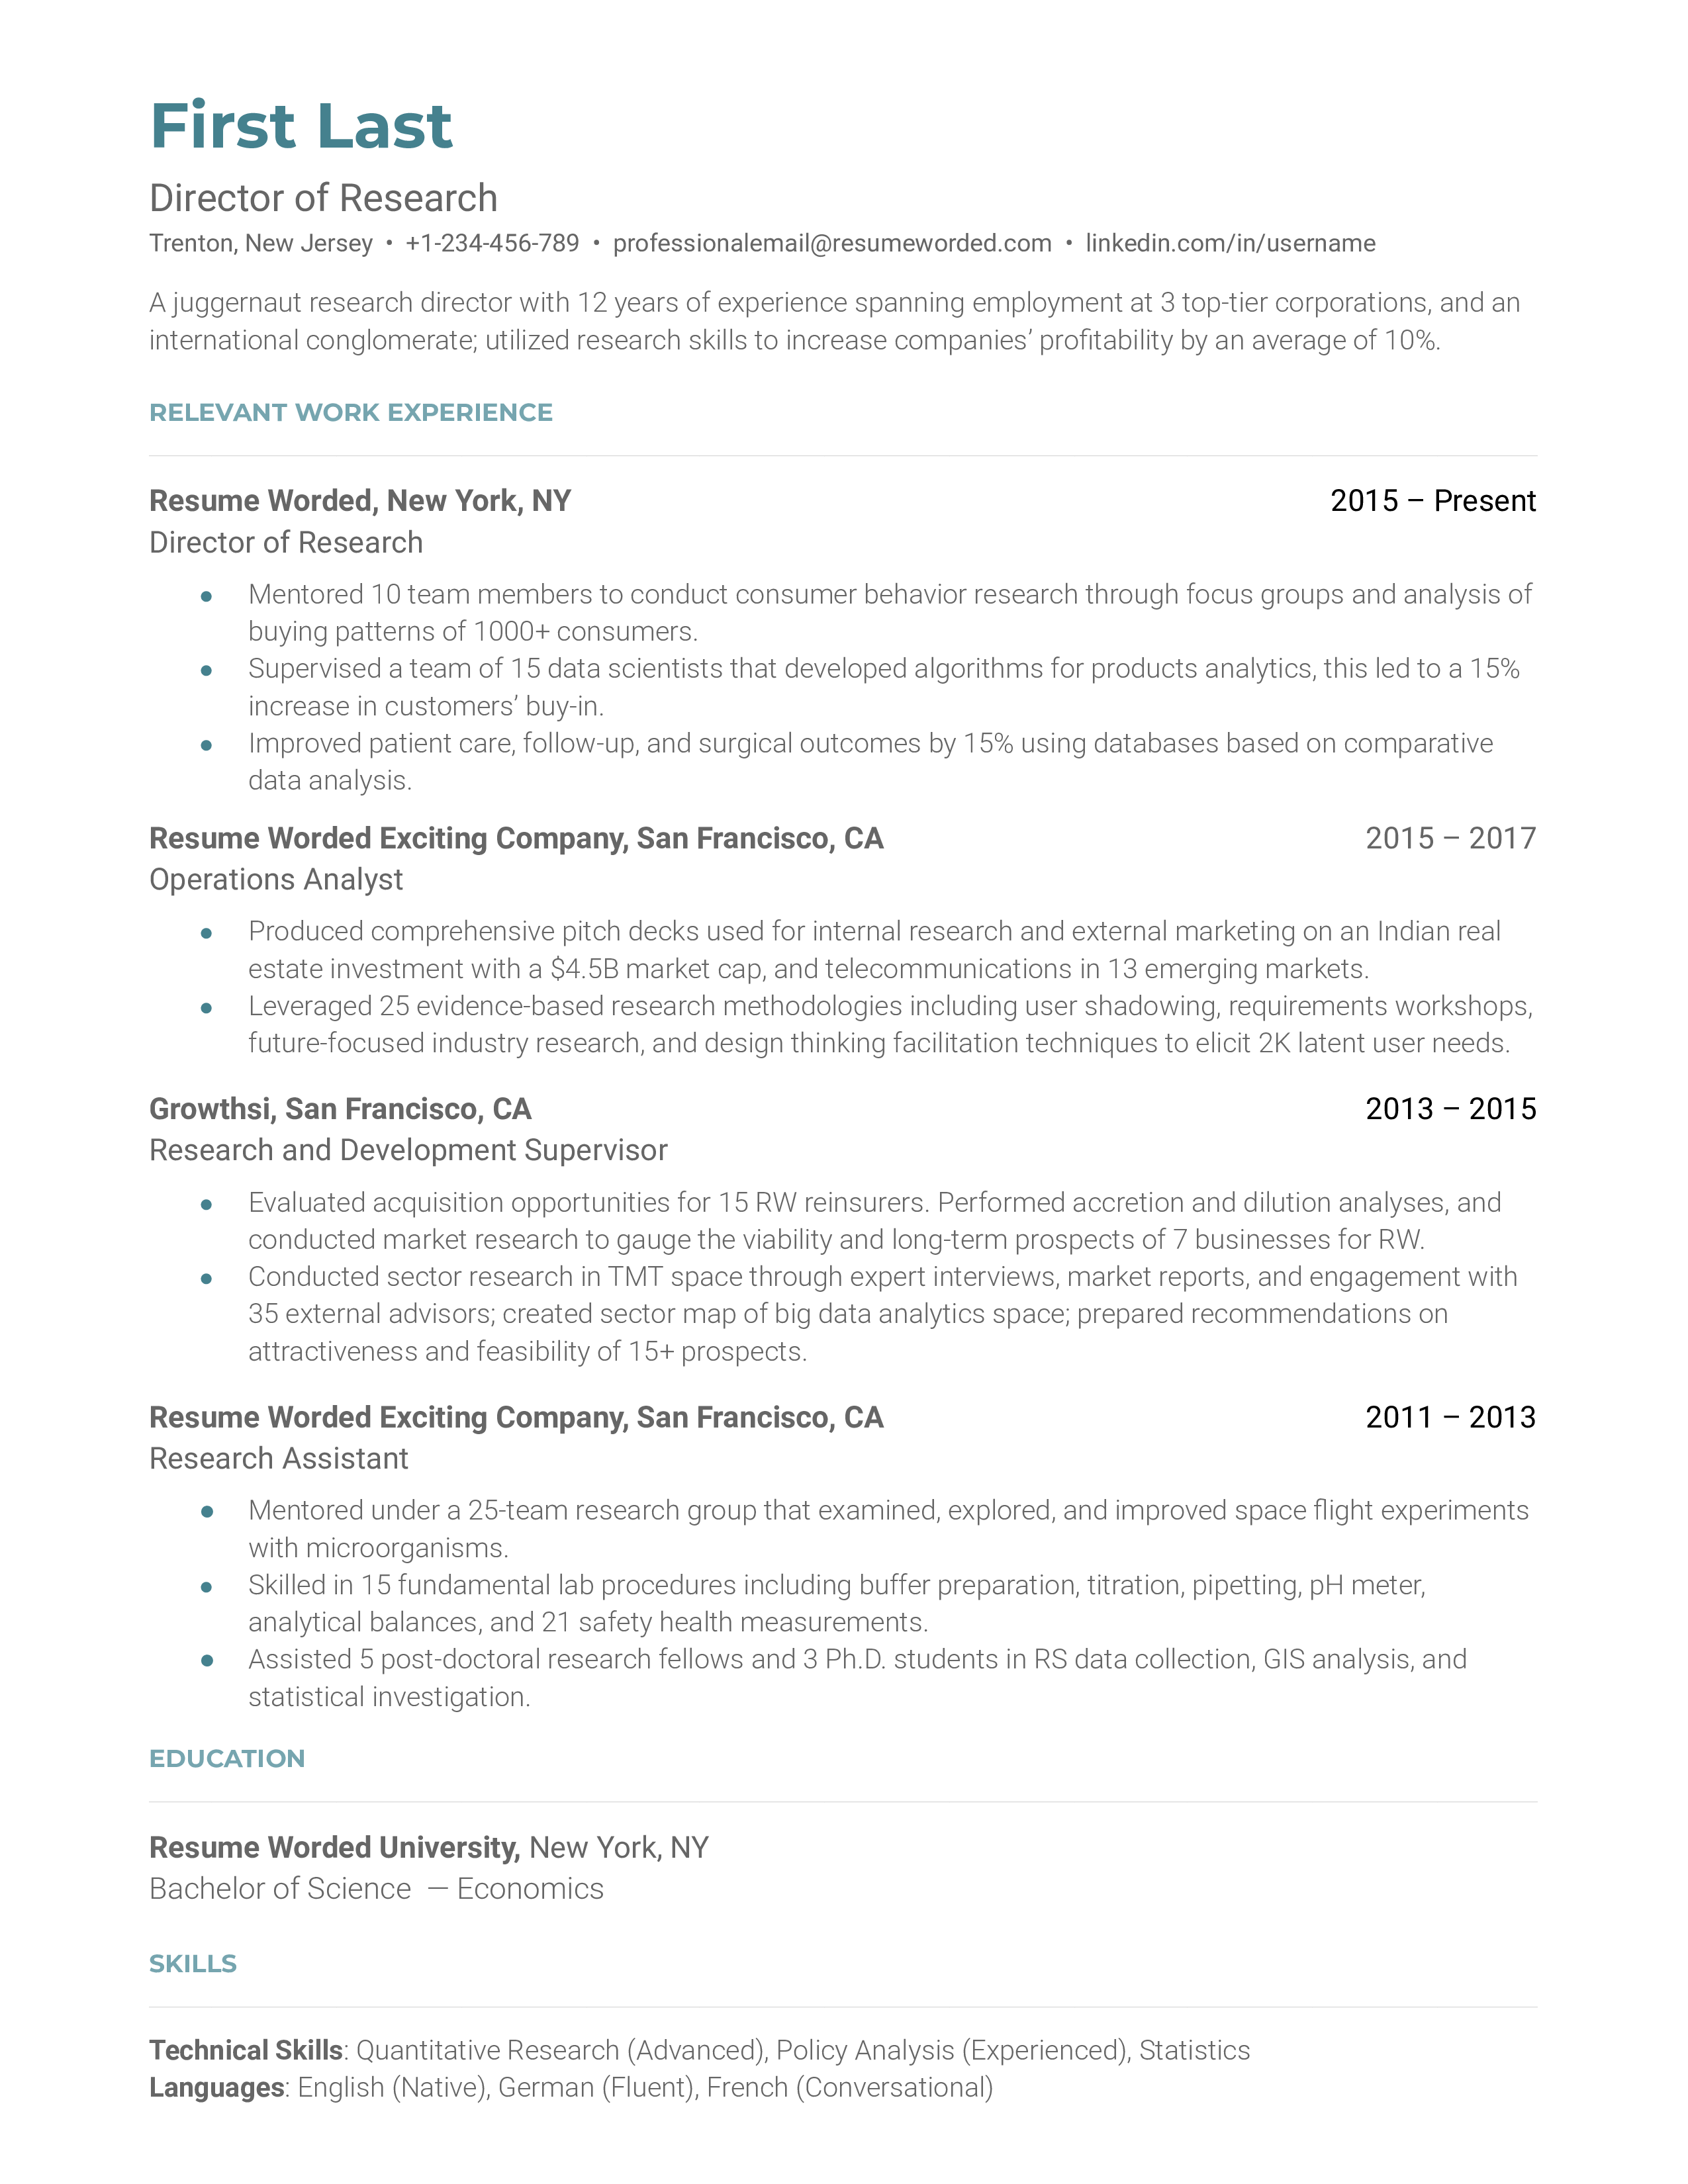 Director of Research Resume Sample